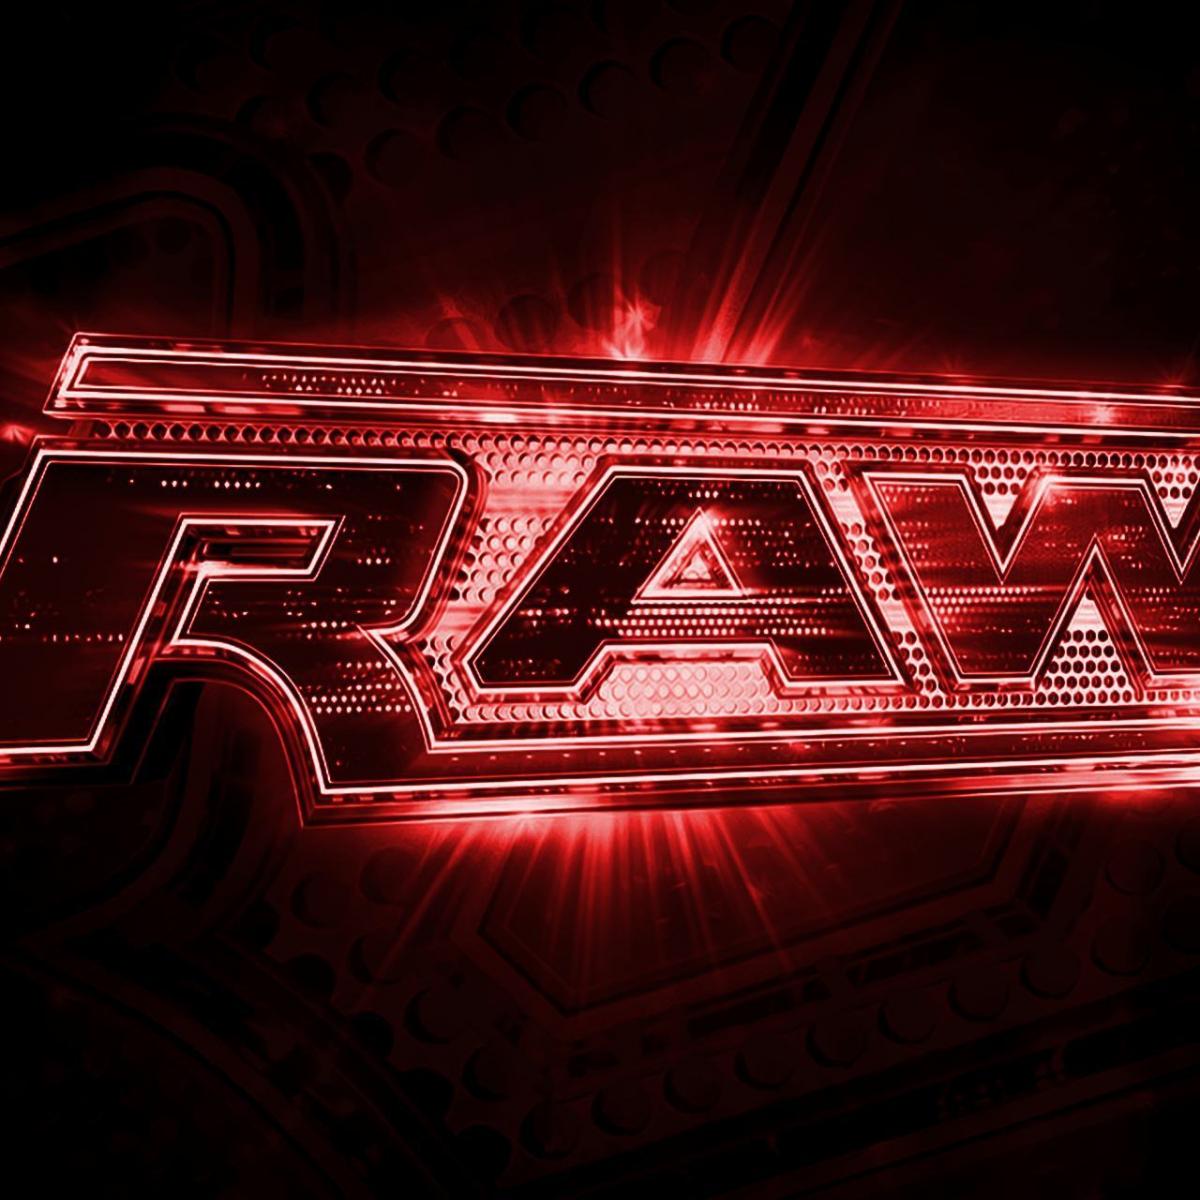 Wwe Raw Live Results Reaction And Analysis For April 6 Bleacher Report Latest News Videos And Highlights